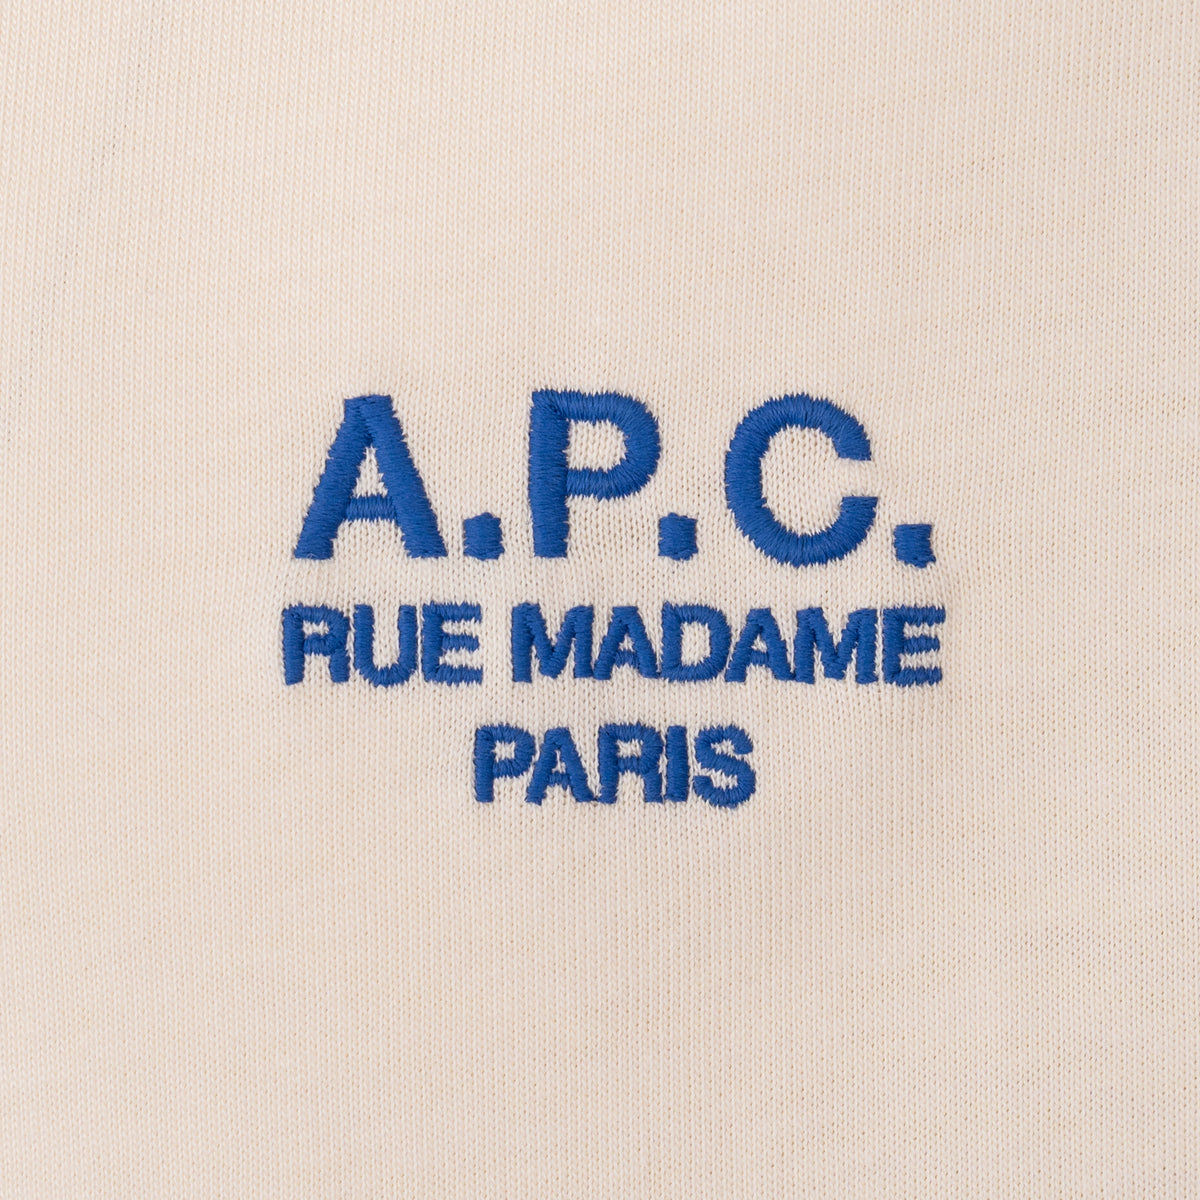 Load image into Gallery viewer, A.P.C. Ecru Raymond Embroidered Logo Tee
